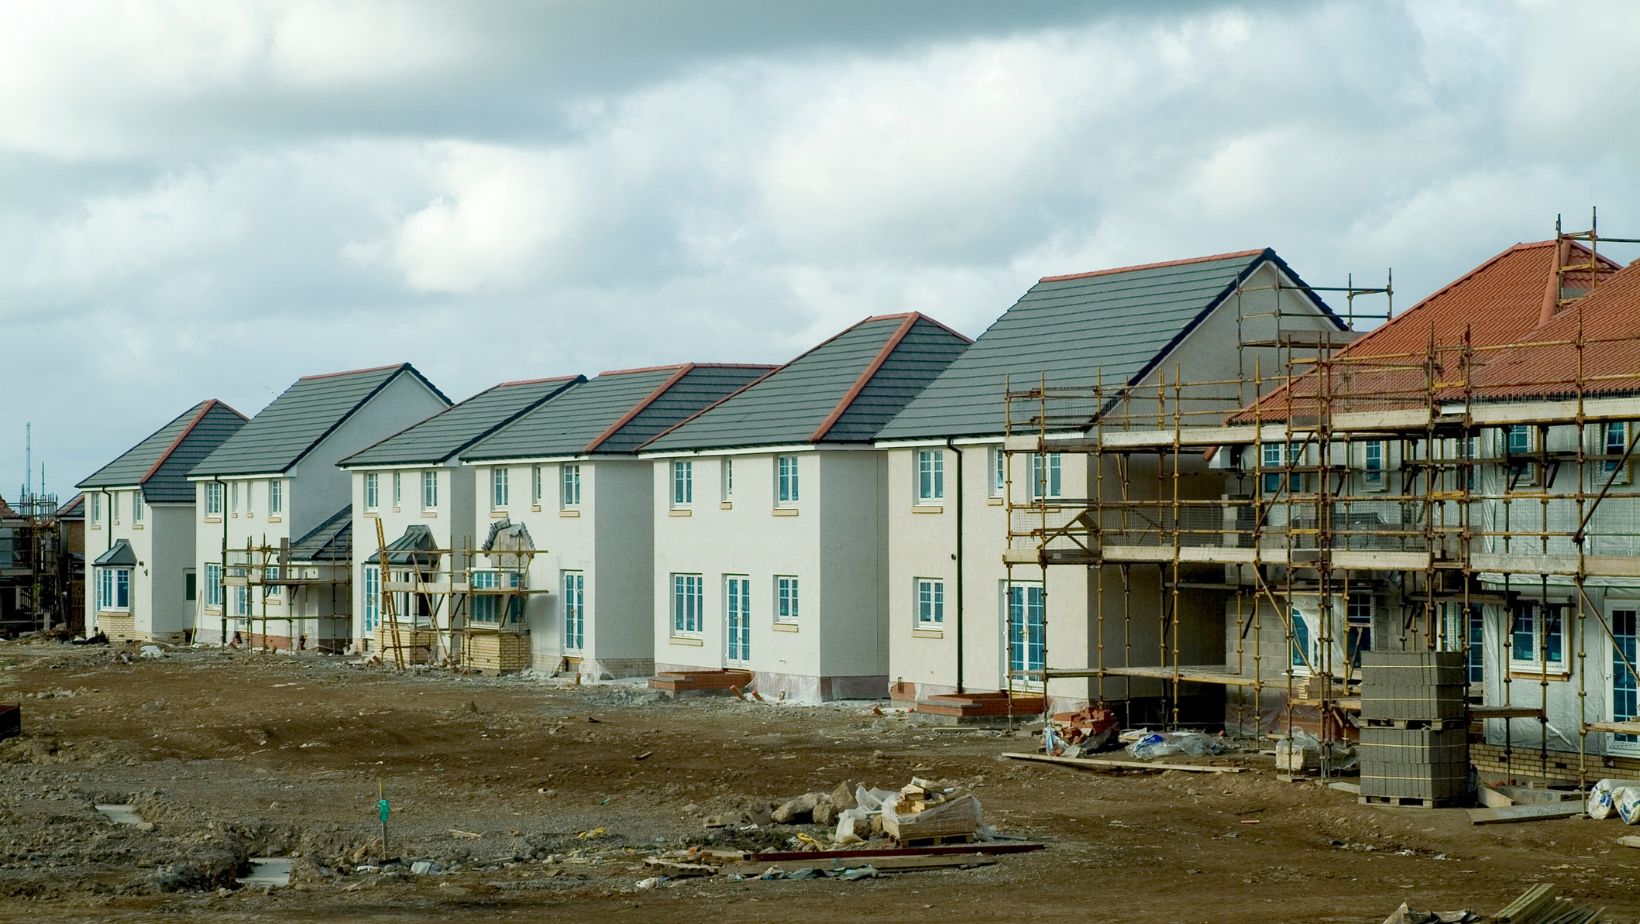 New builds in regulation compliance 